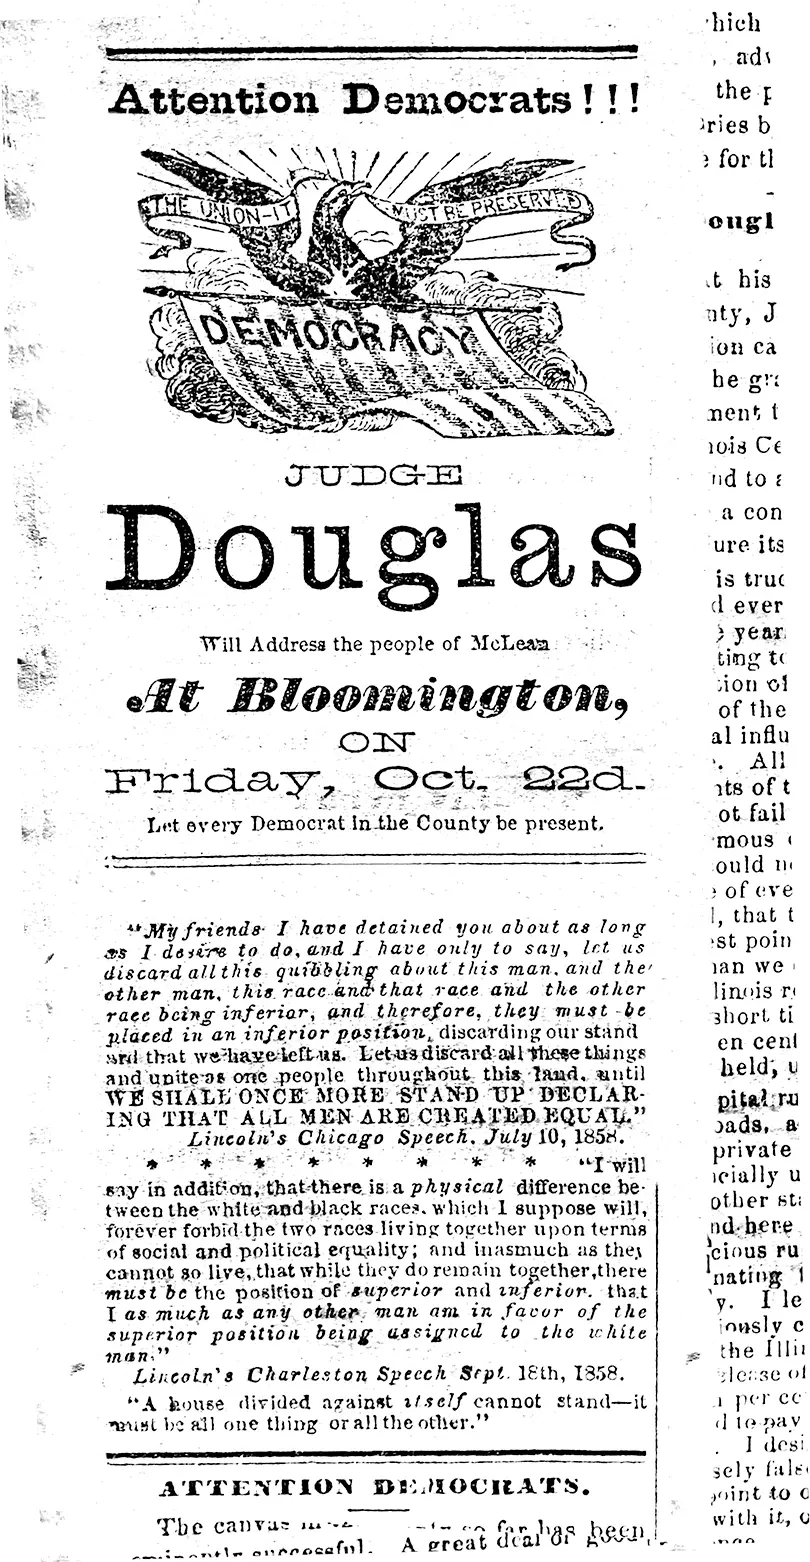 Printed notice reading ‘Attention Democrats’ announcing an upcoming Douglas address in Bloomington.